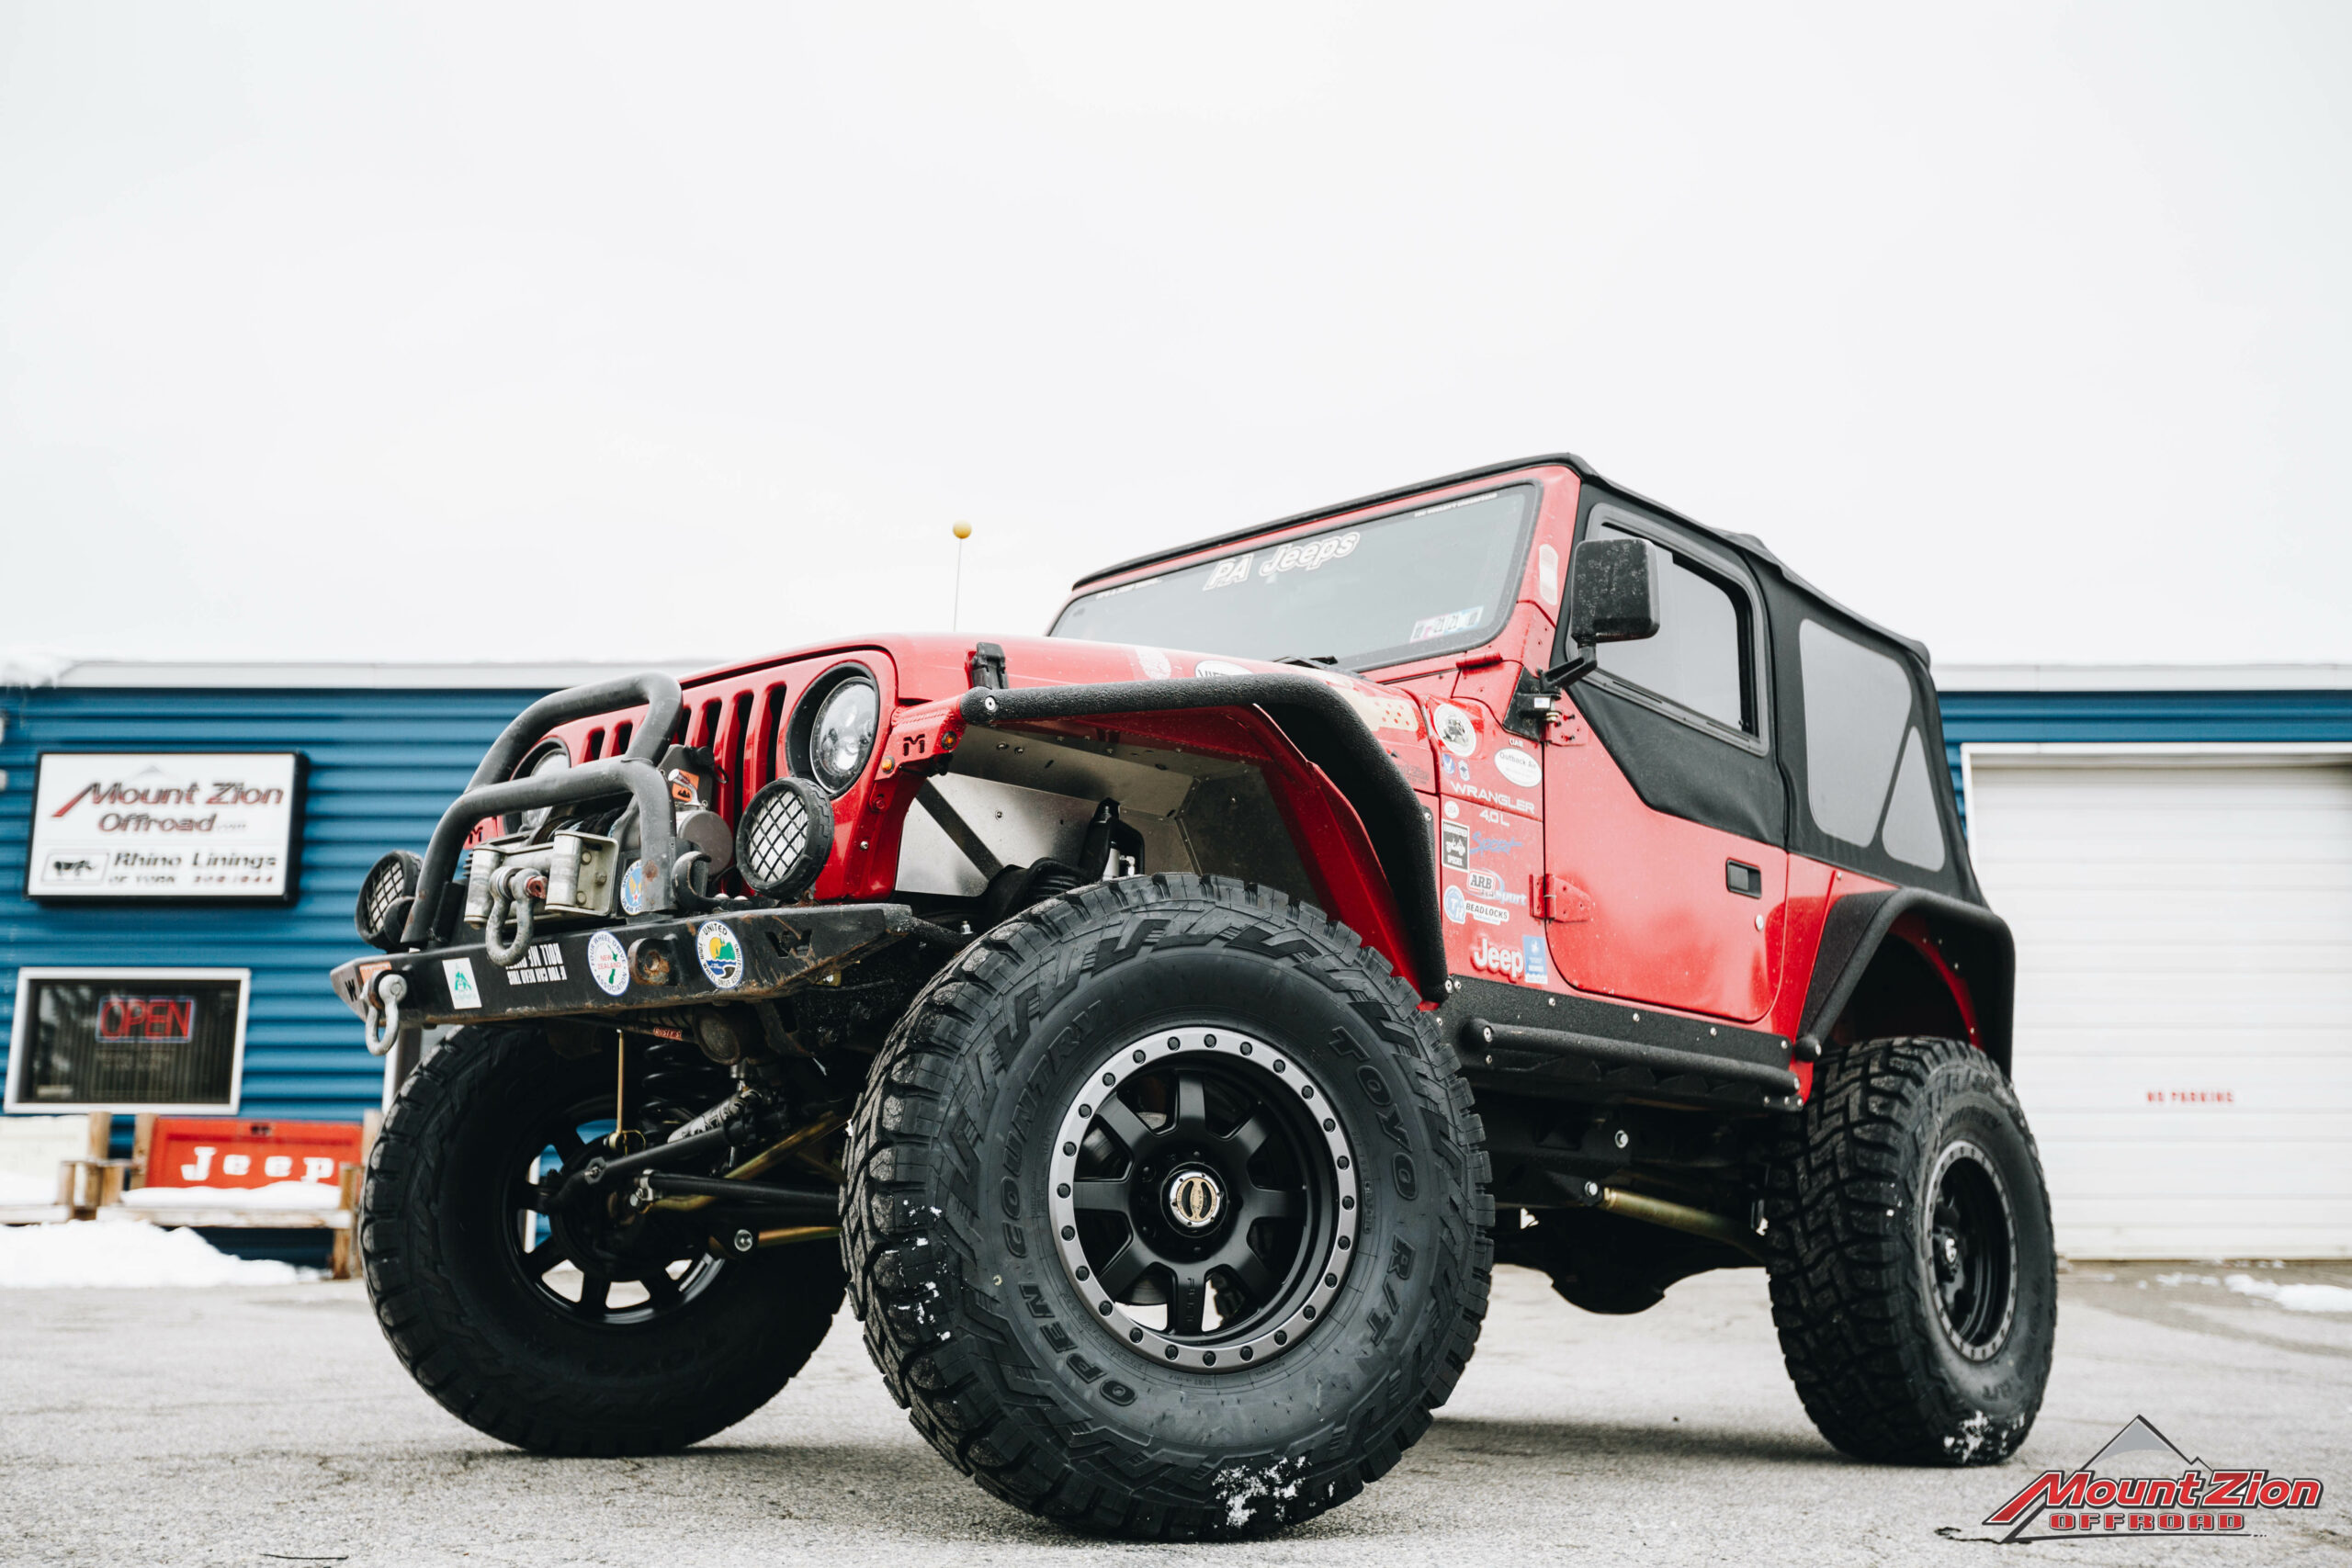 Lifted 1998 Jeep Wrangler Sport - Mount Zion Offroad